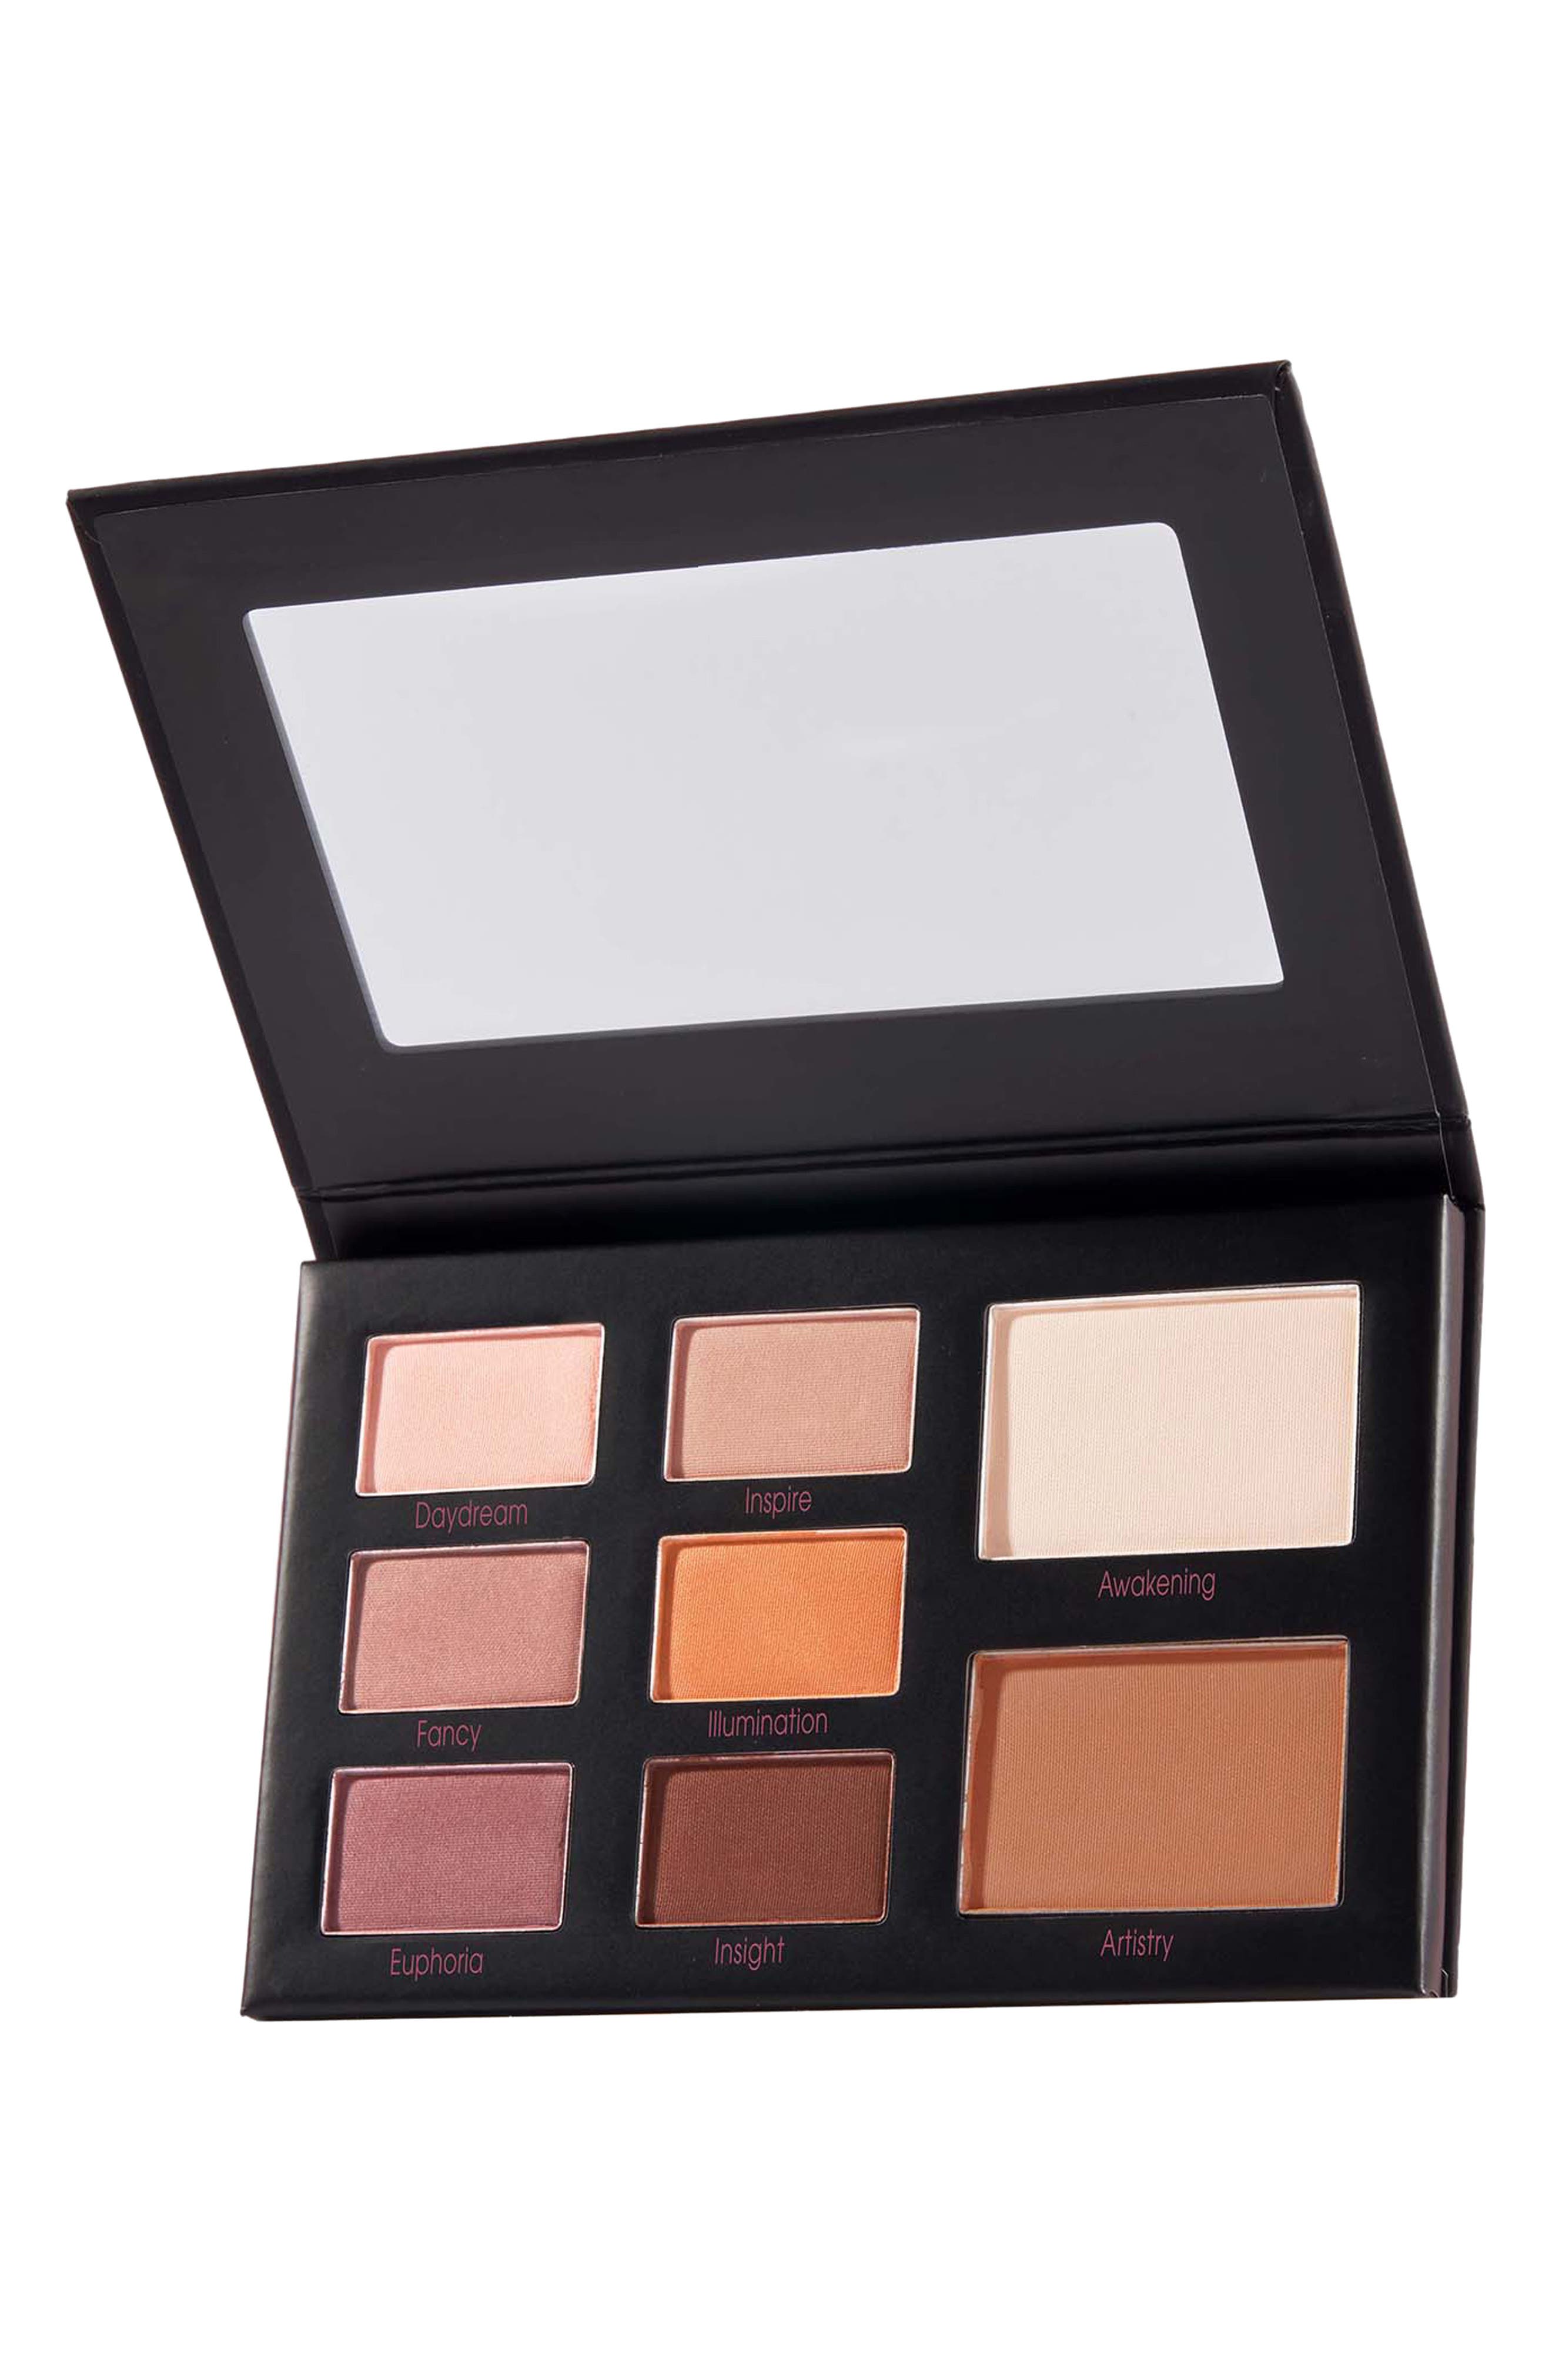 MALLY Muted Muse Eyeshadow Palette at Nordstrom